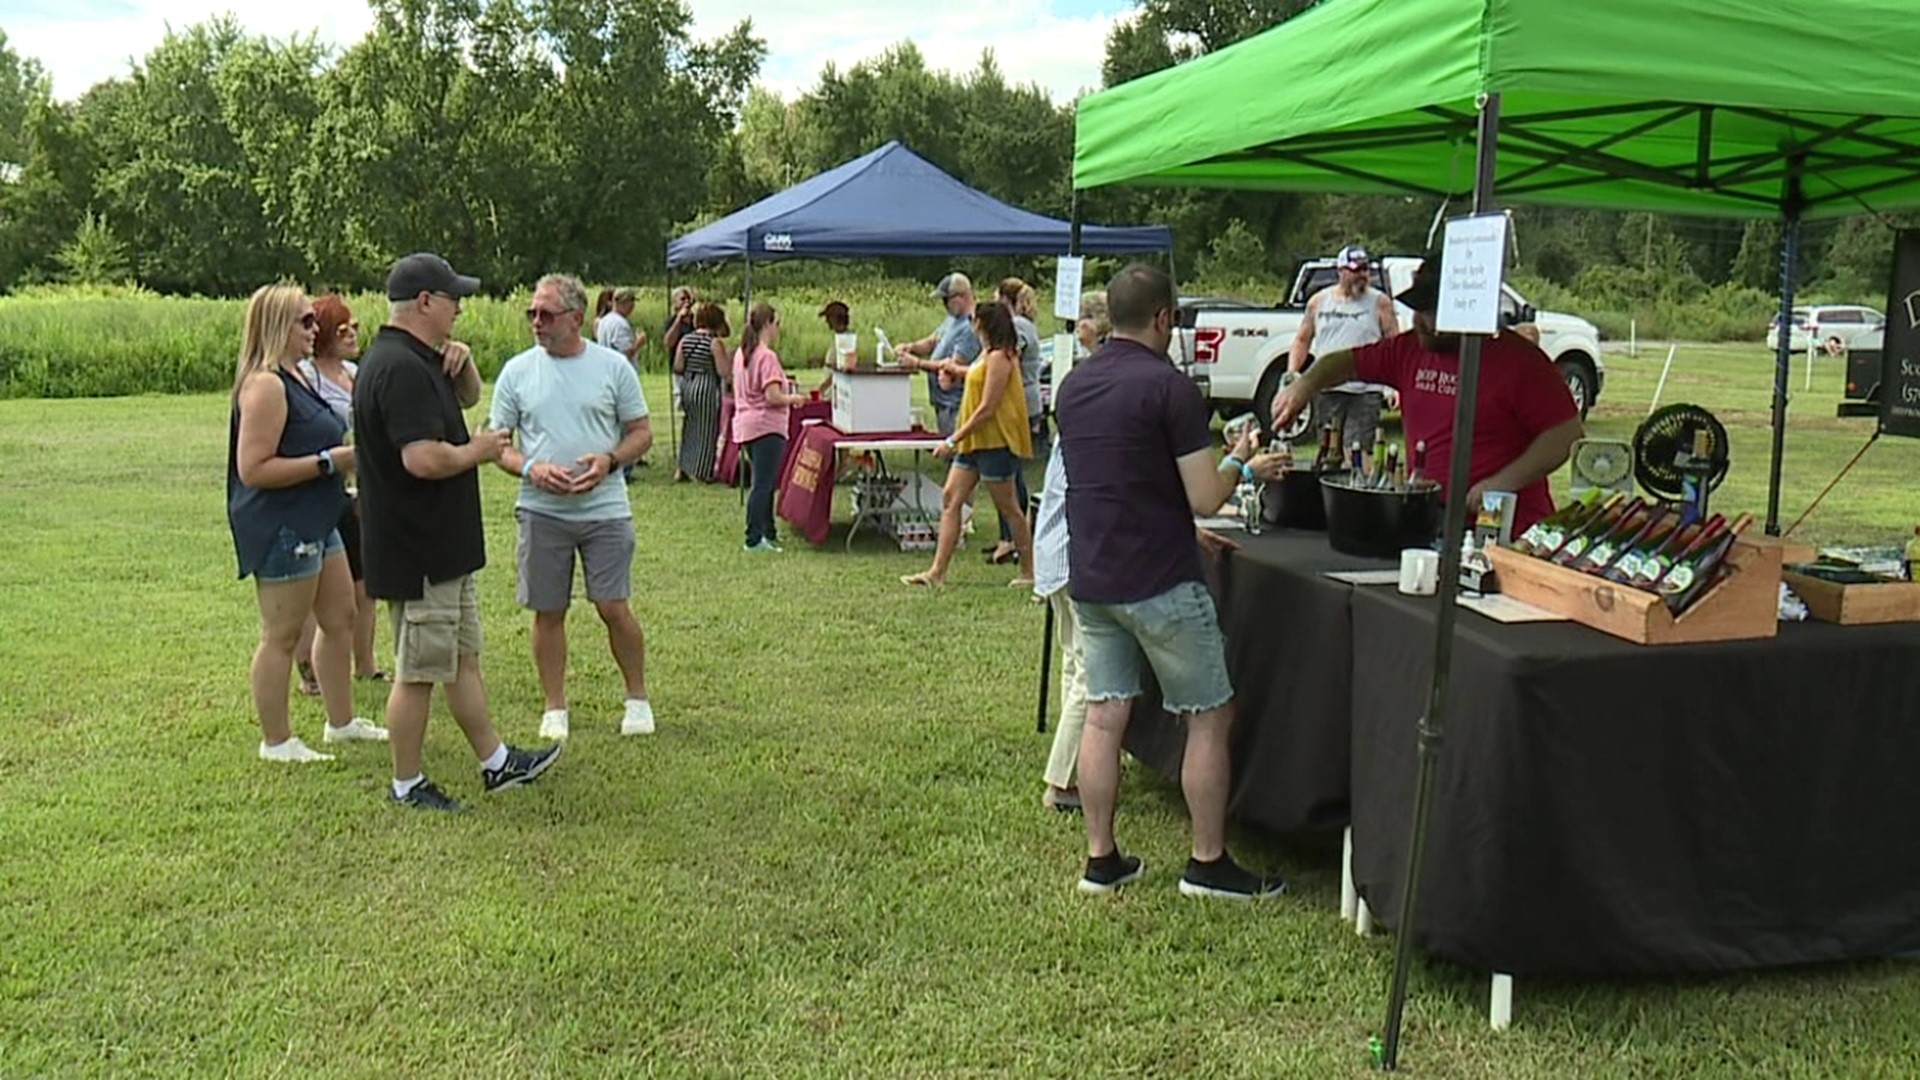 The Second Annual Rhythm & Wine Fundraiser was held in West Wyoming on Saturday.